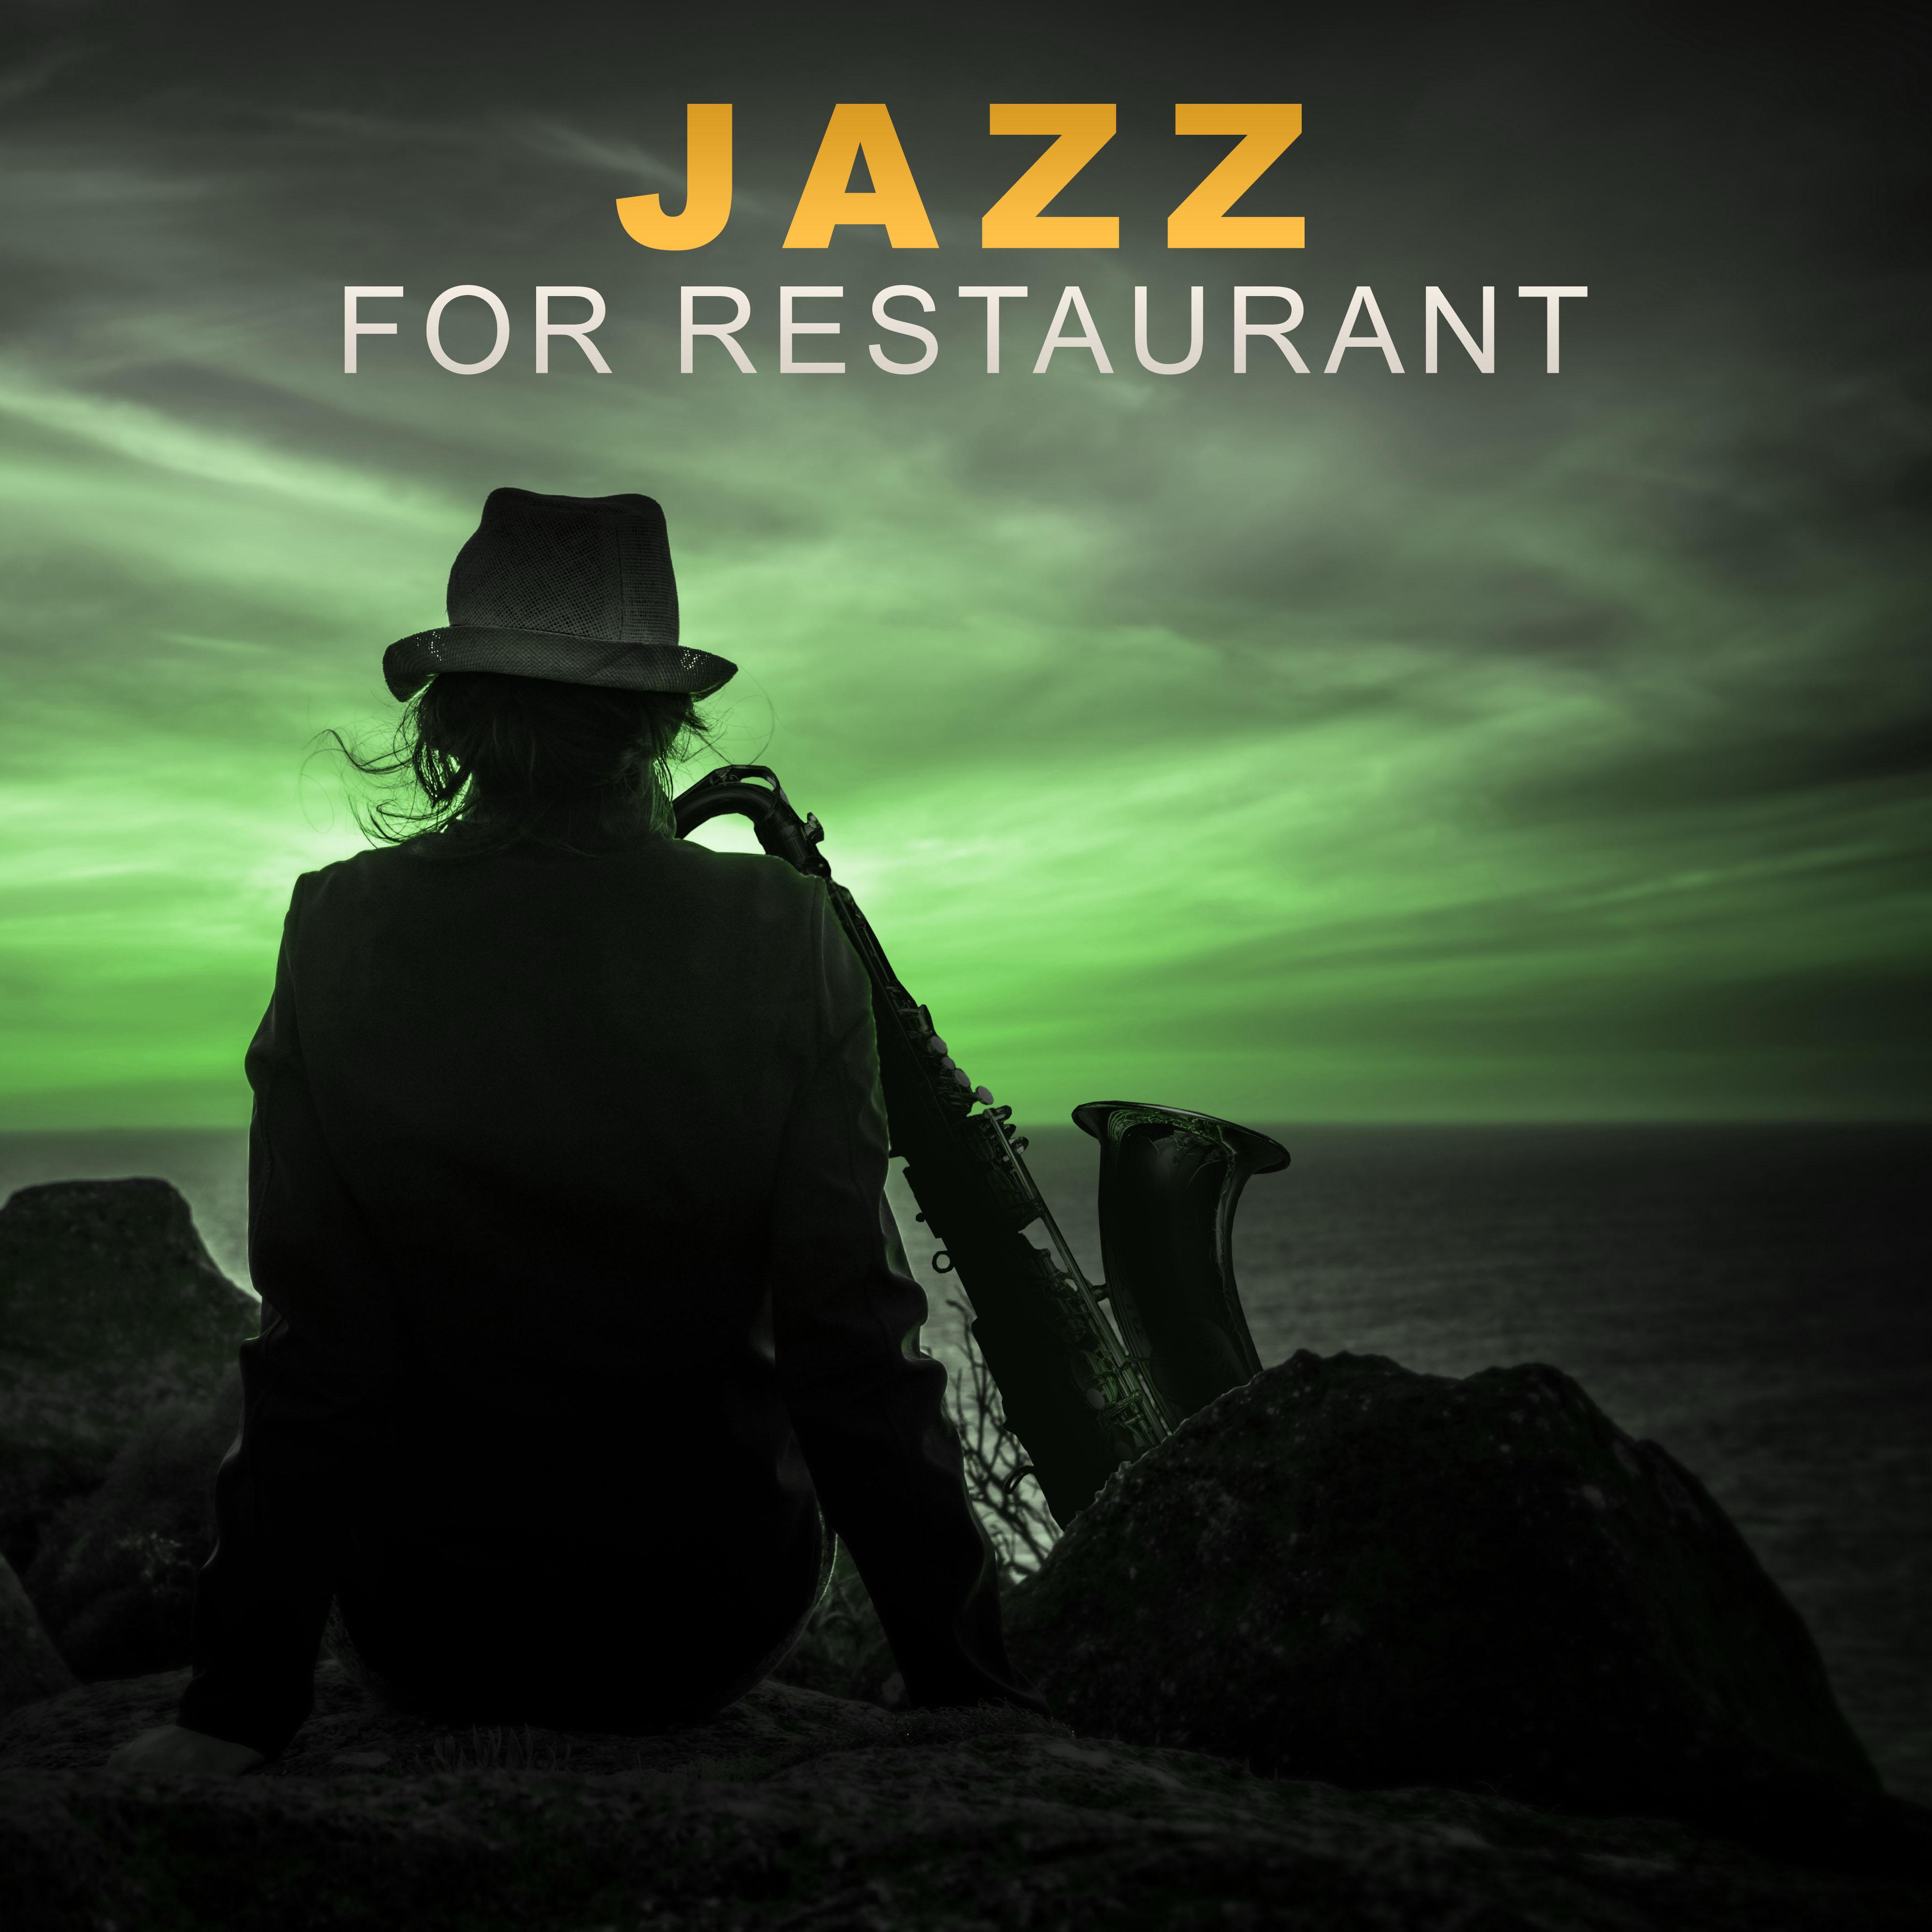 Jazz for Restaurant – Smooth Background to Nice Meetings, Special Dinner, First Date, Melow Jazz